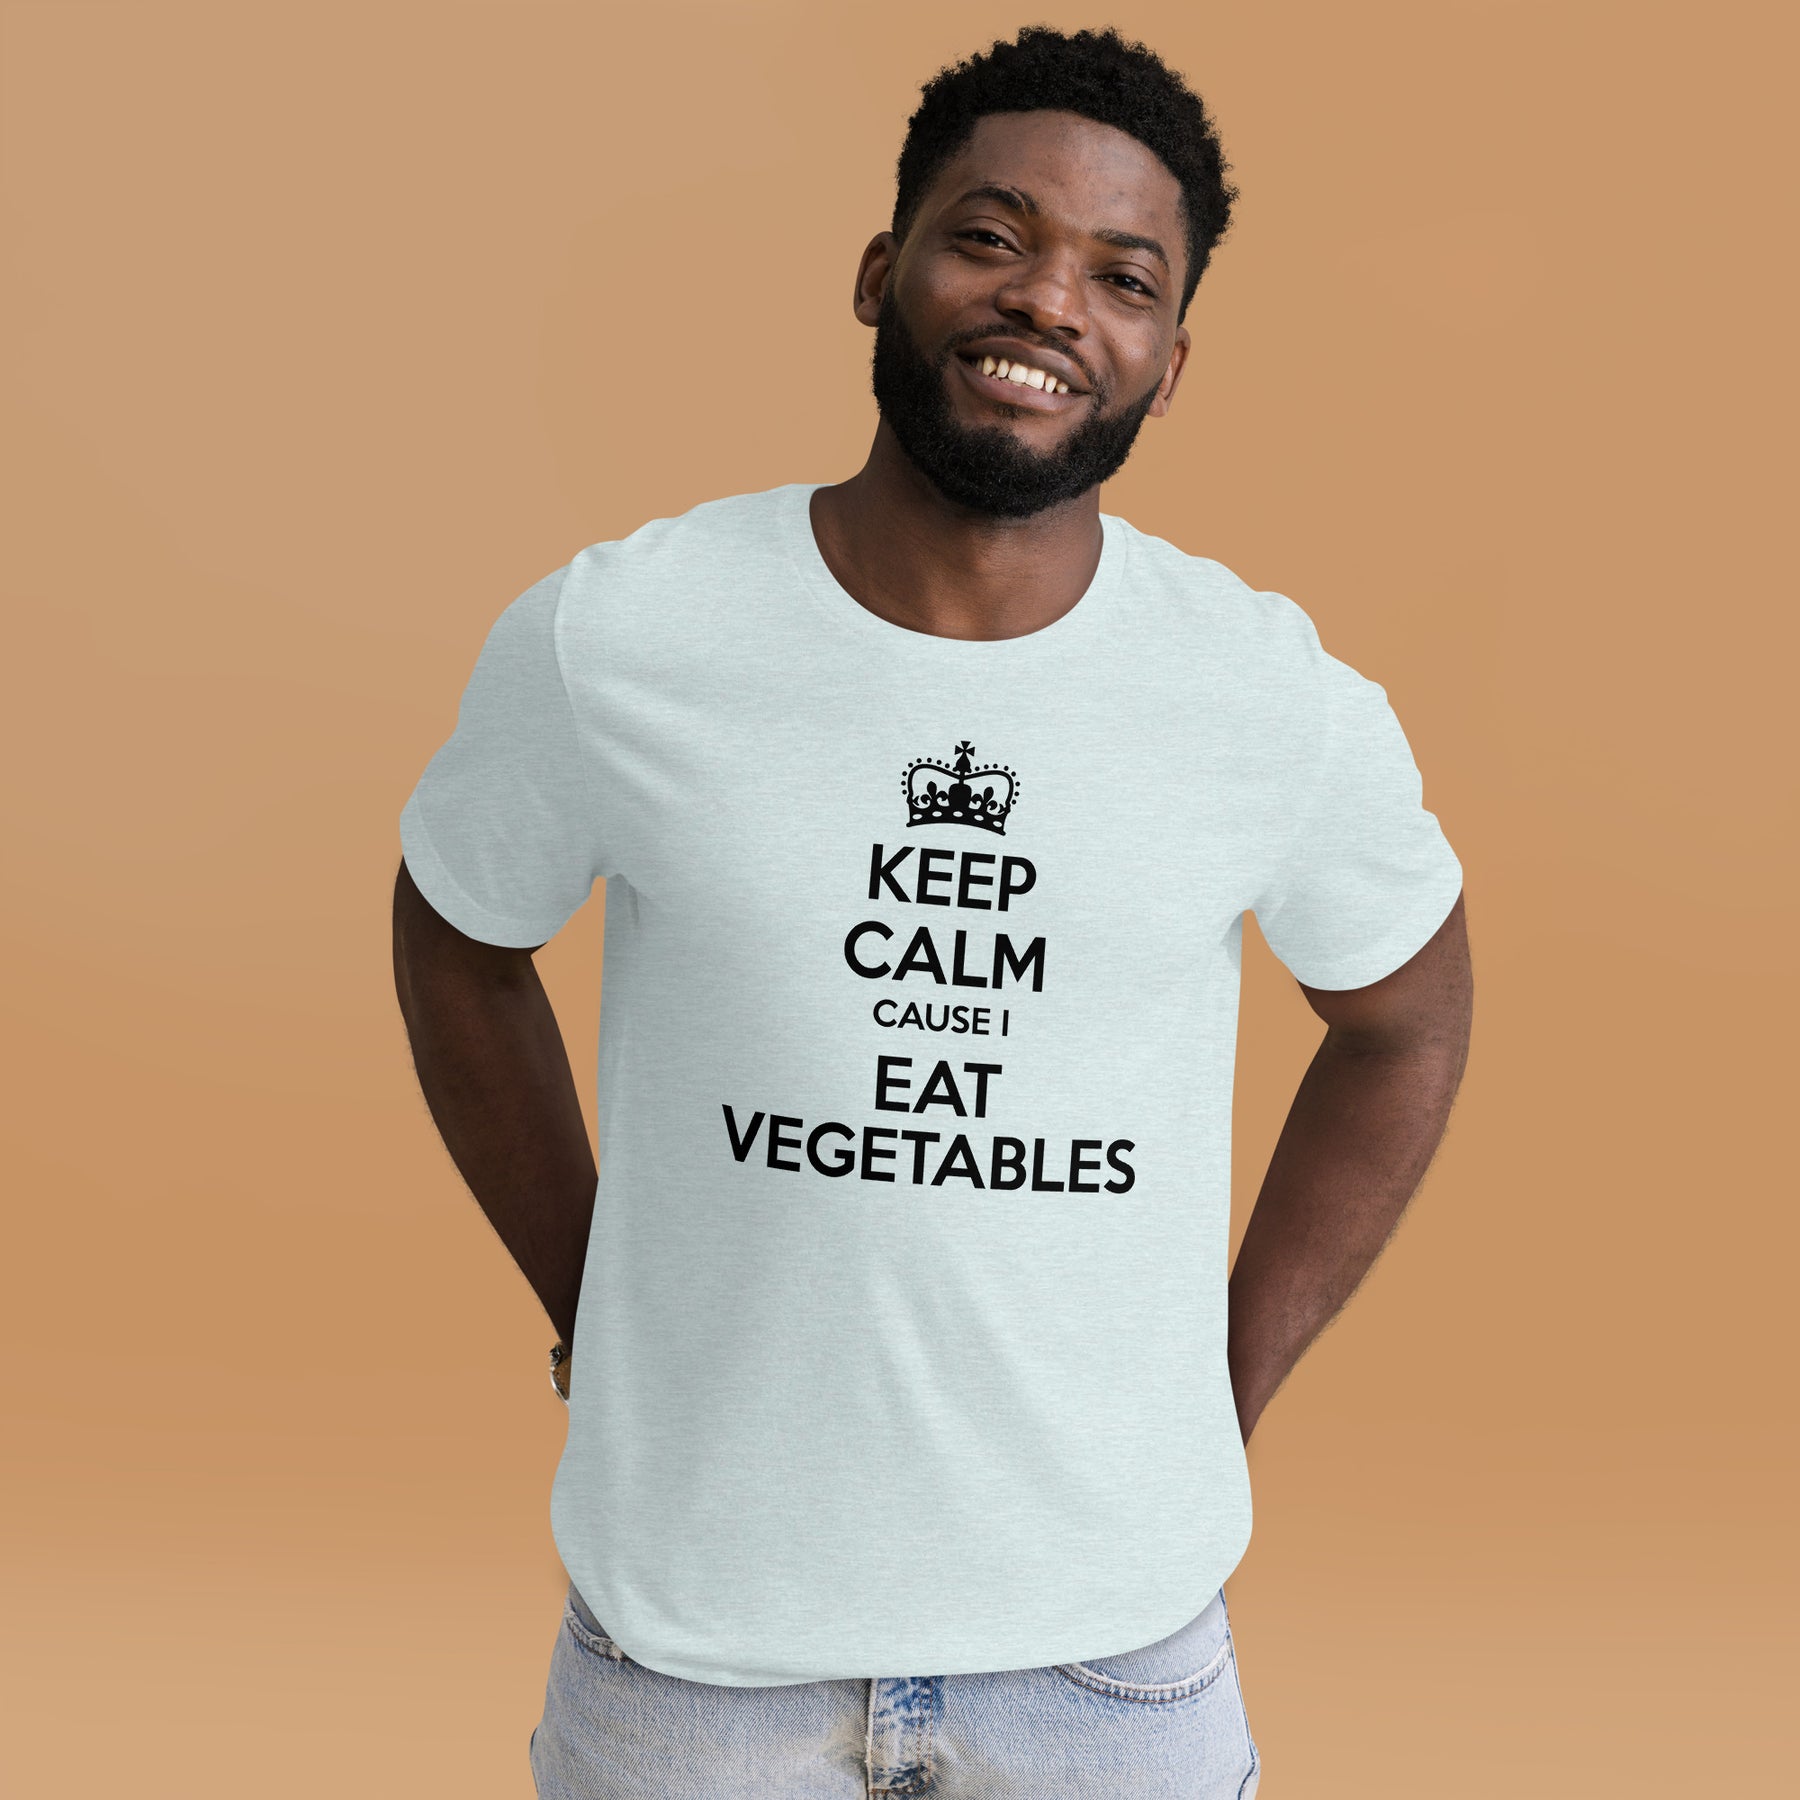 KEEP CALM I EAT VEGETABLES Colored t-shirt